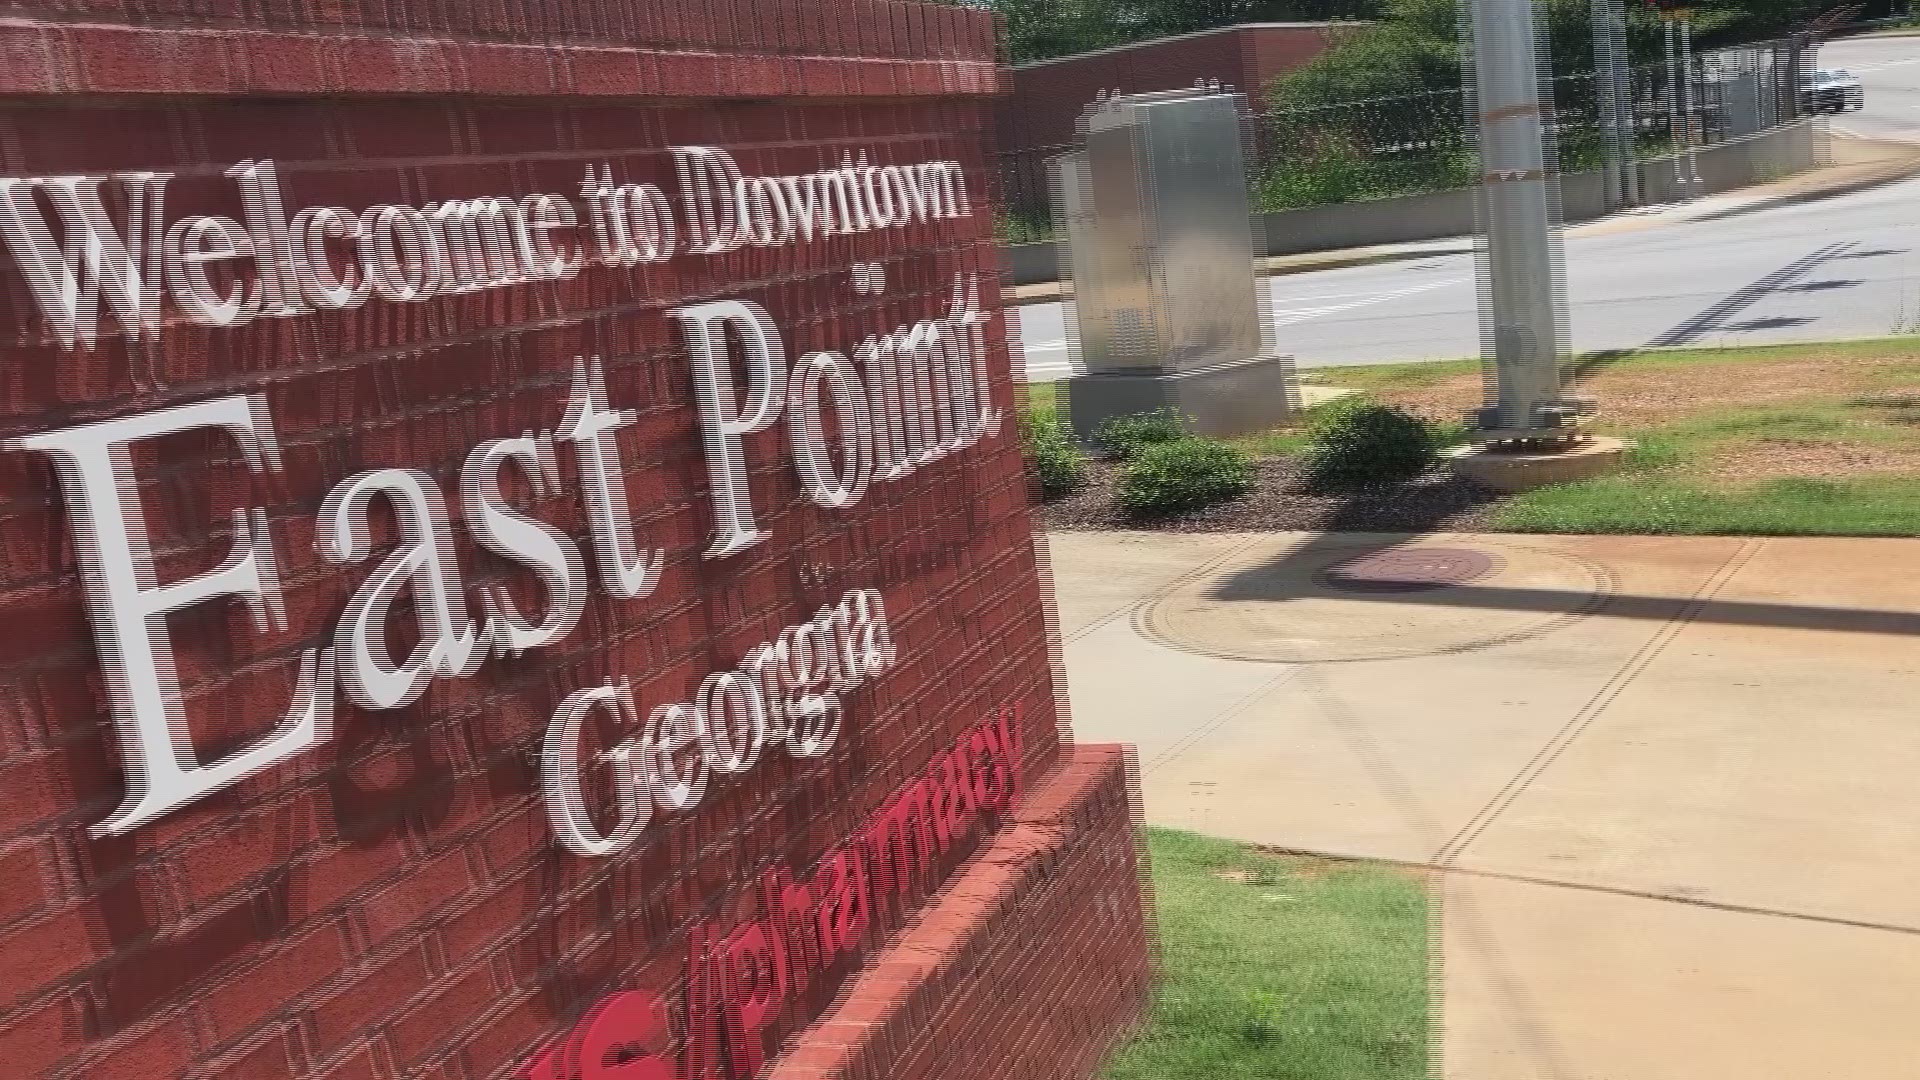 On July 6th, 2020, East Point City Council Adopts Face Mask Ordinance